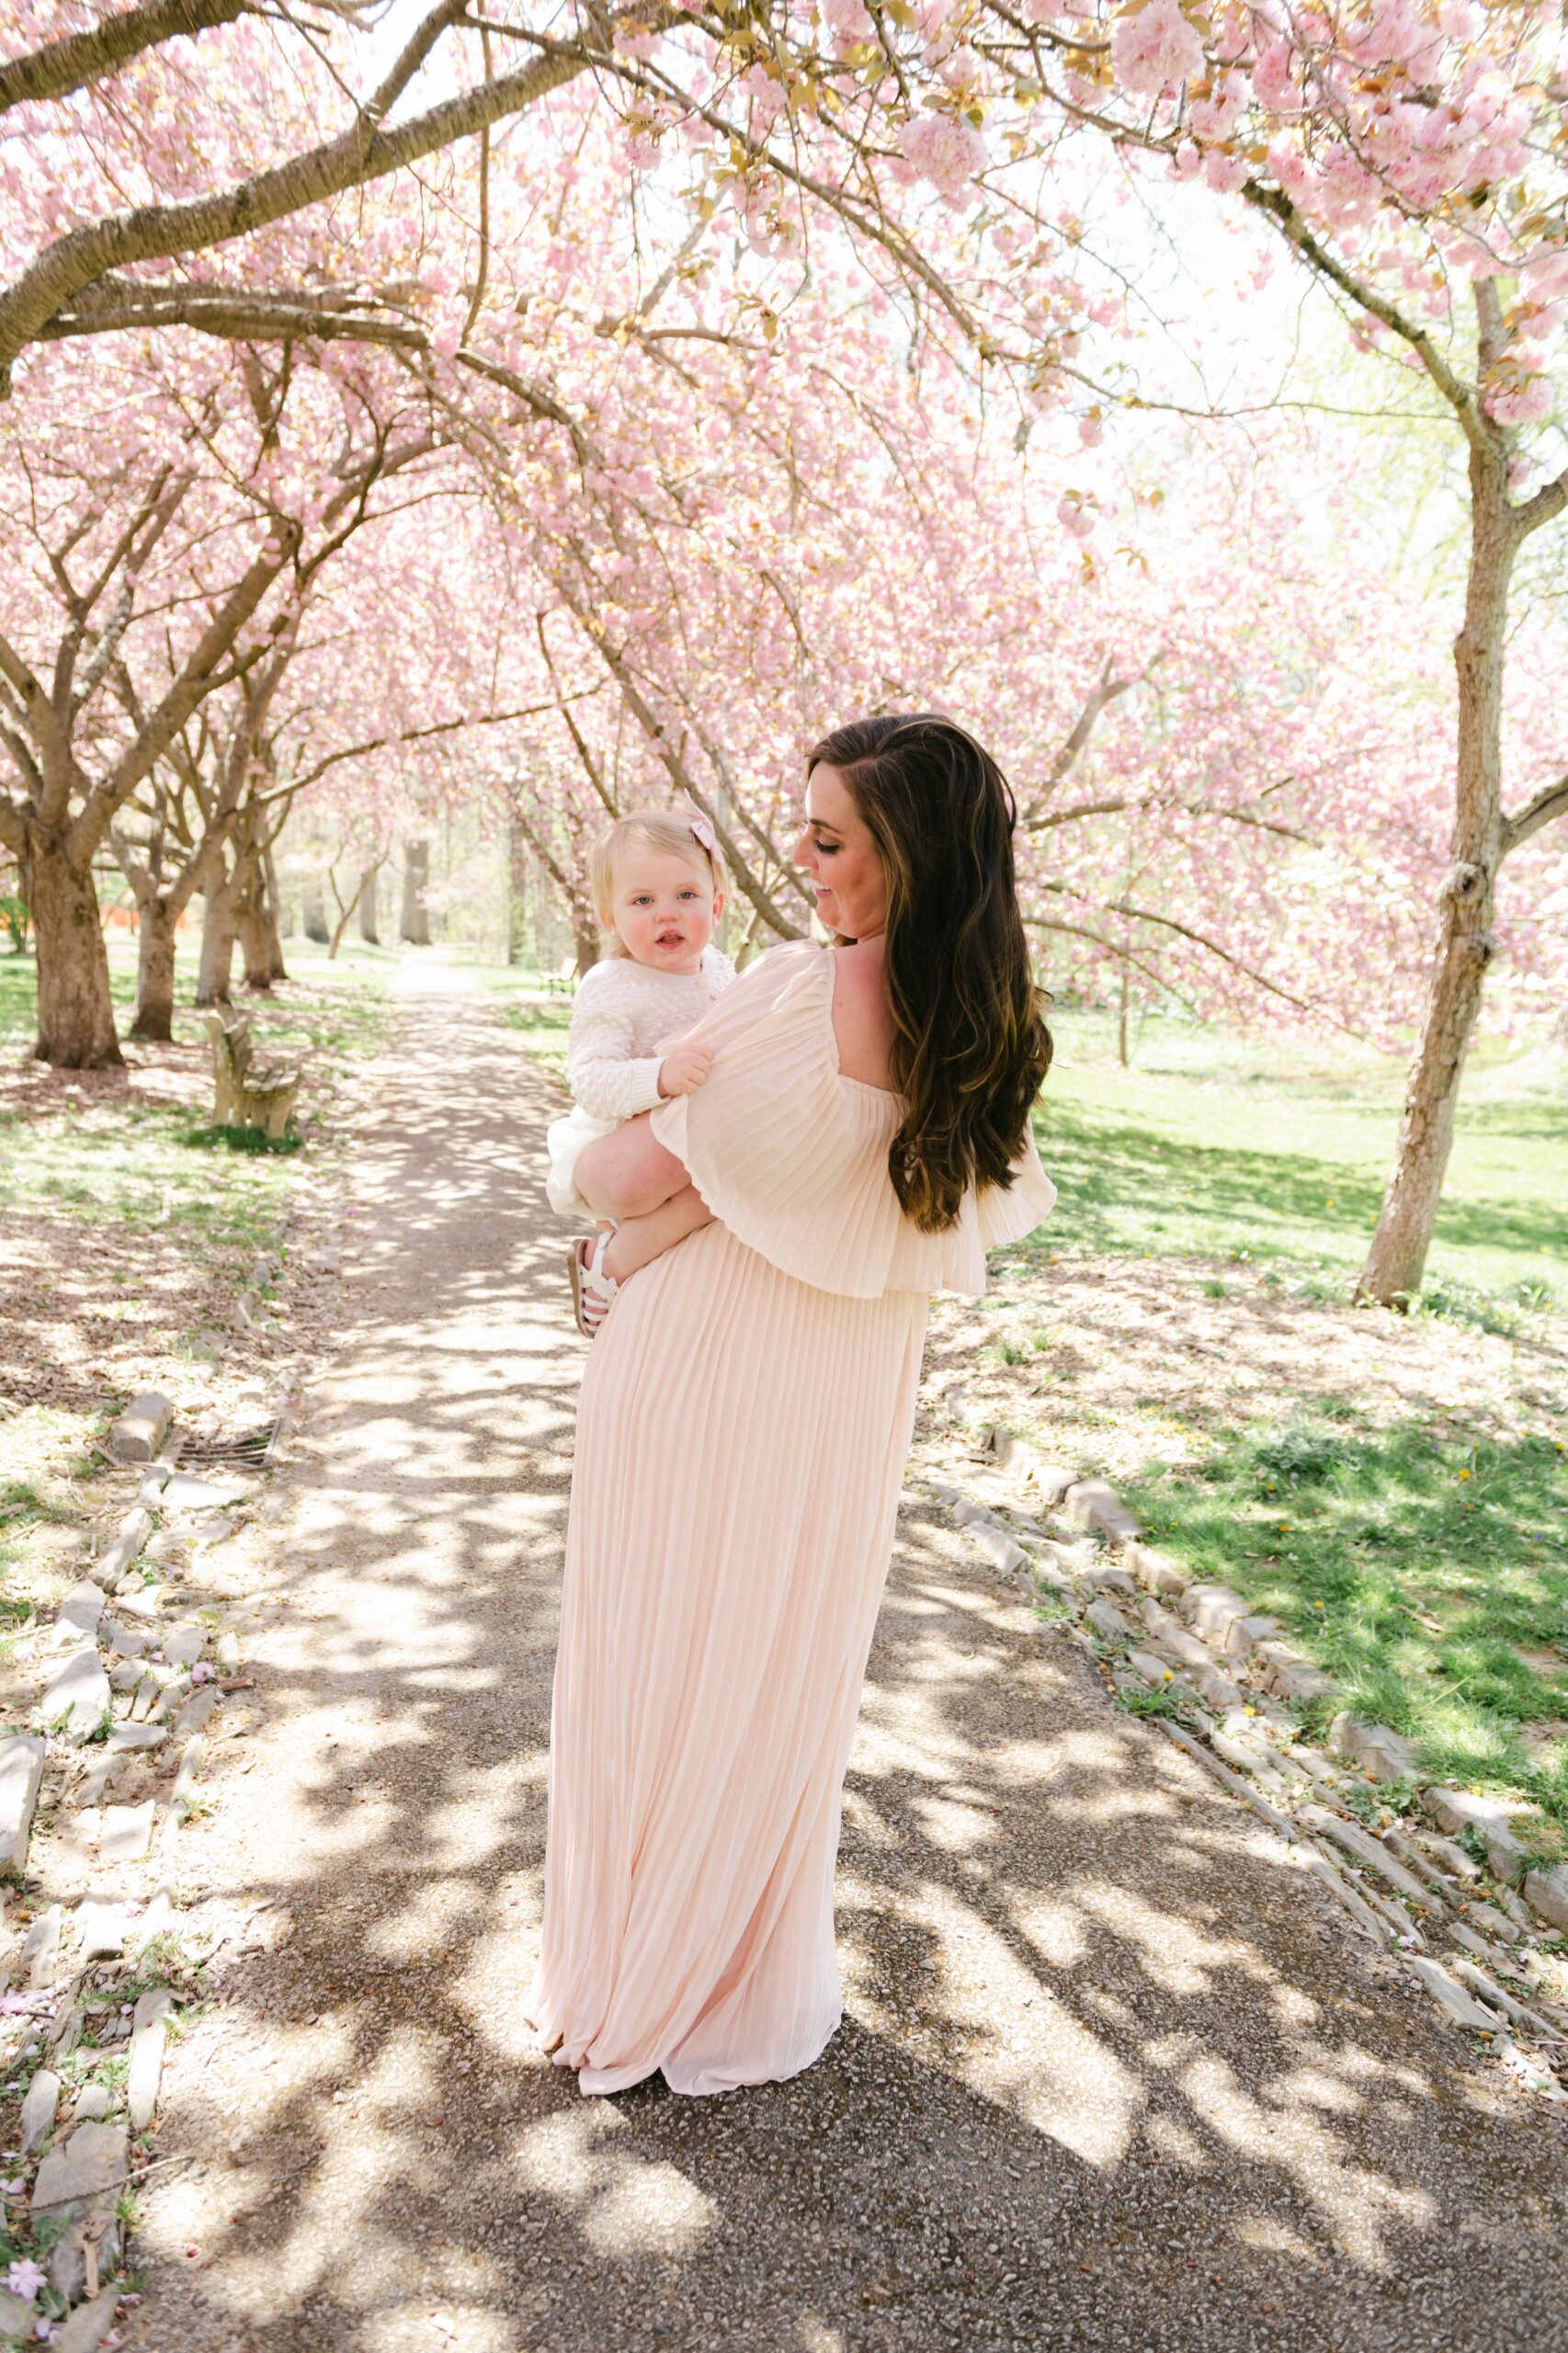 A mother in a beige dress holds her toddler daughter on her hip in a park path lined with pink dogwood trees